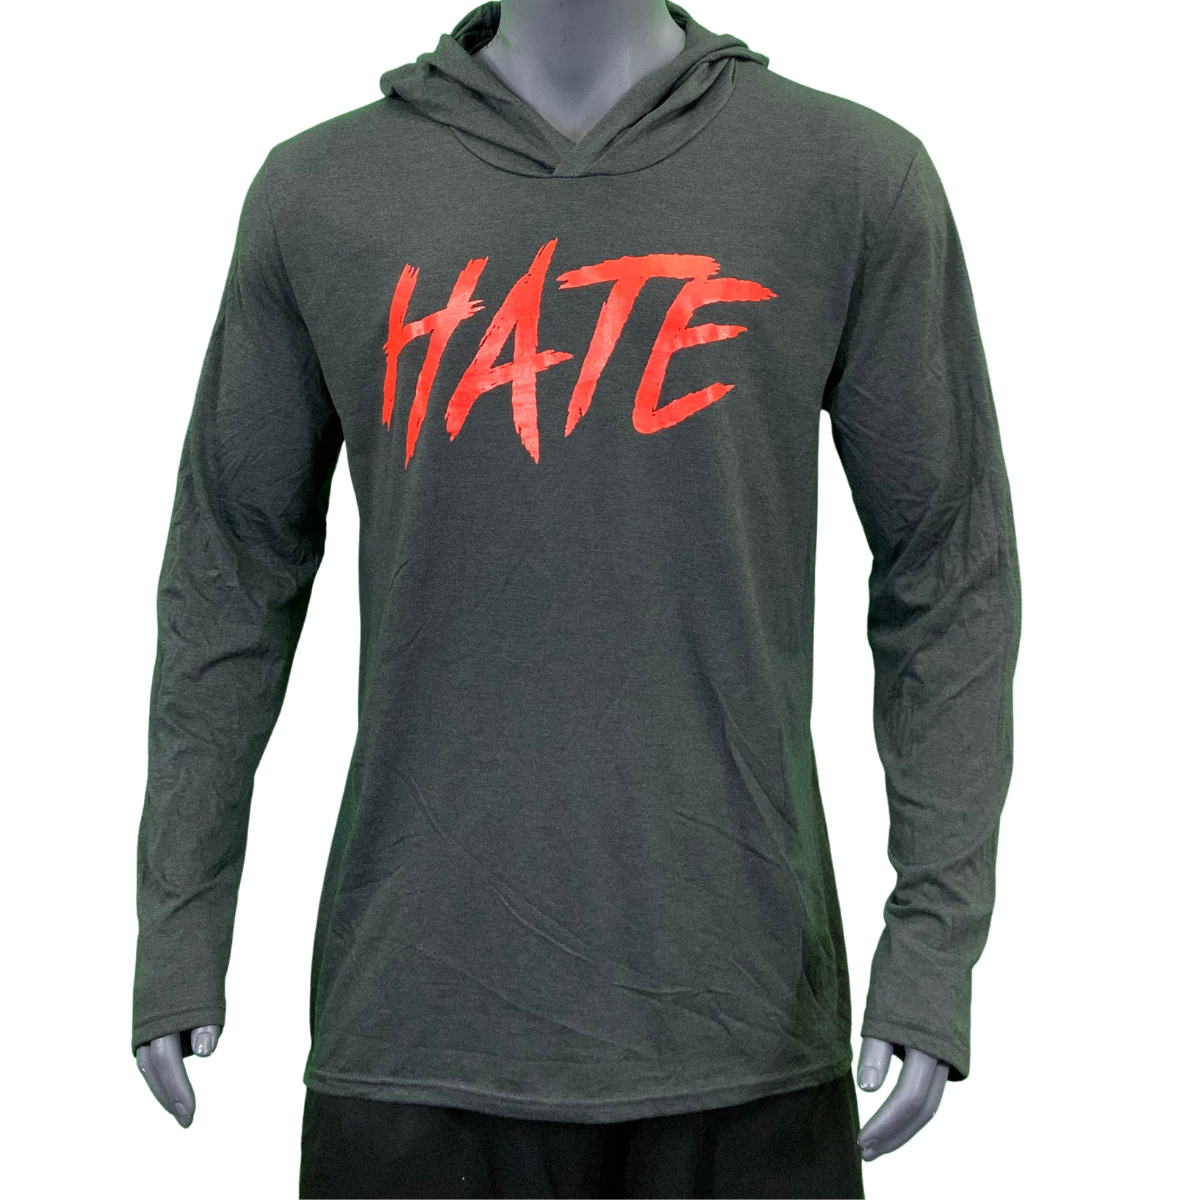 HATE Thin Hoodie Black Frost/Red